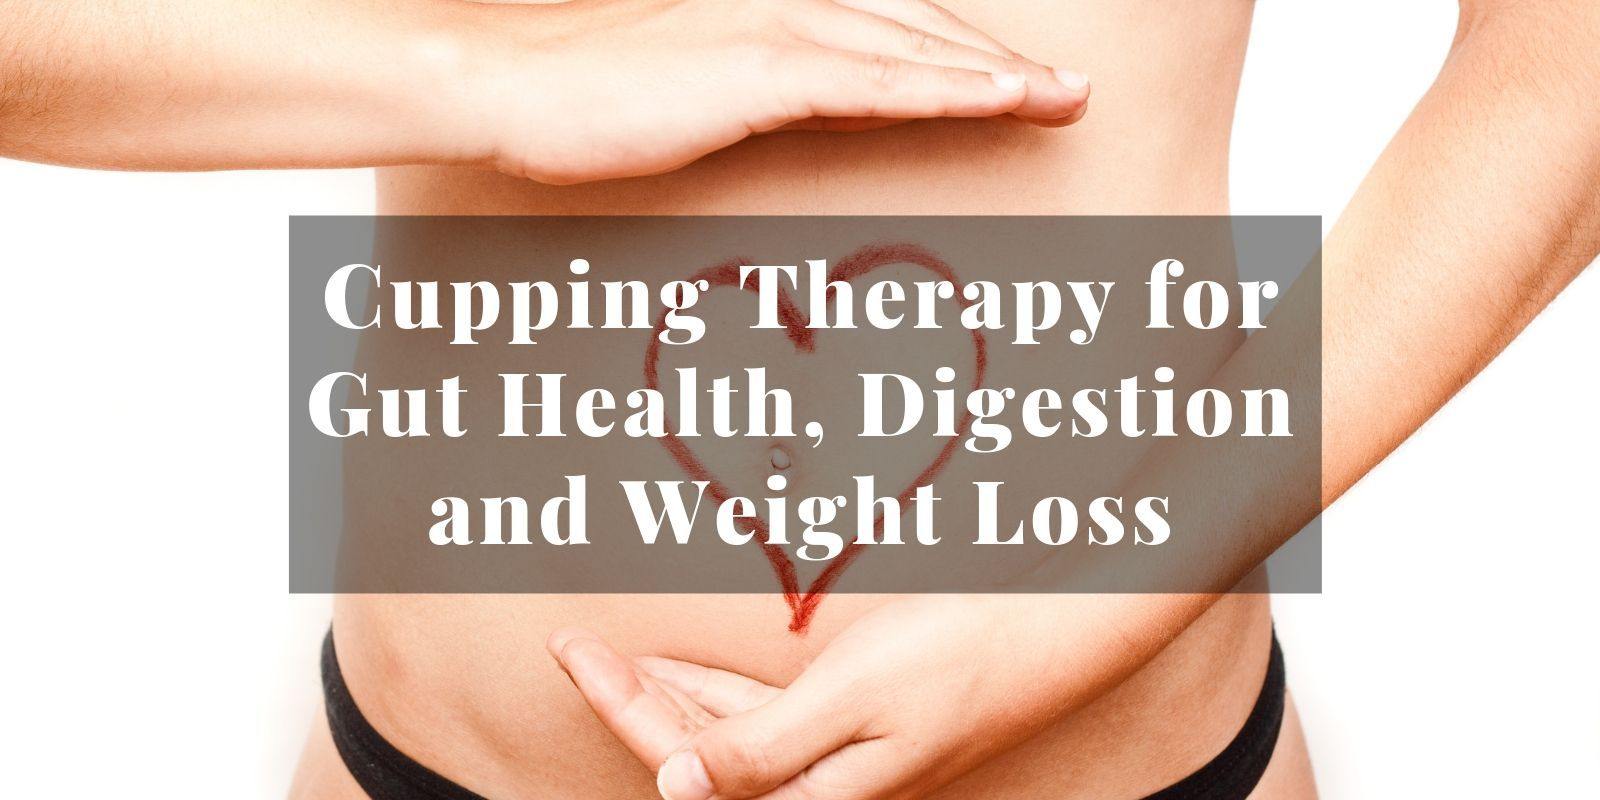 Cupping Therapy for Gut Health and Weight Loss